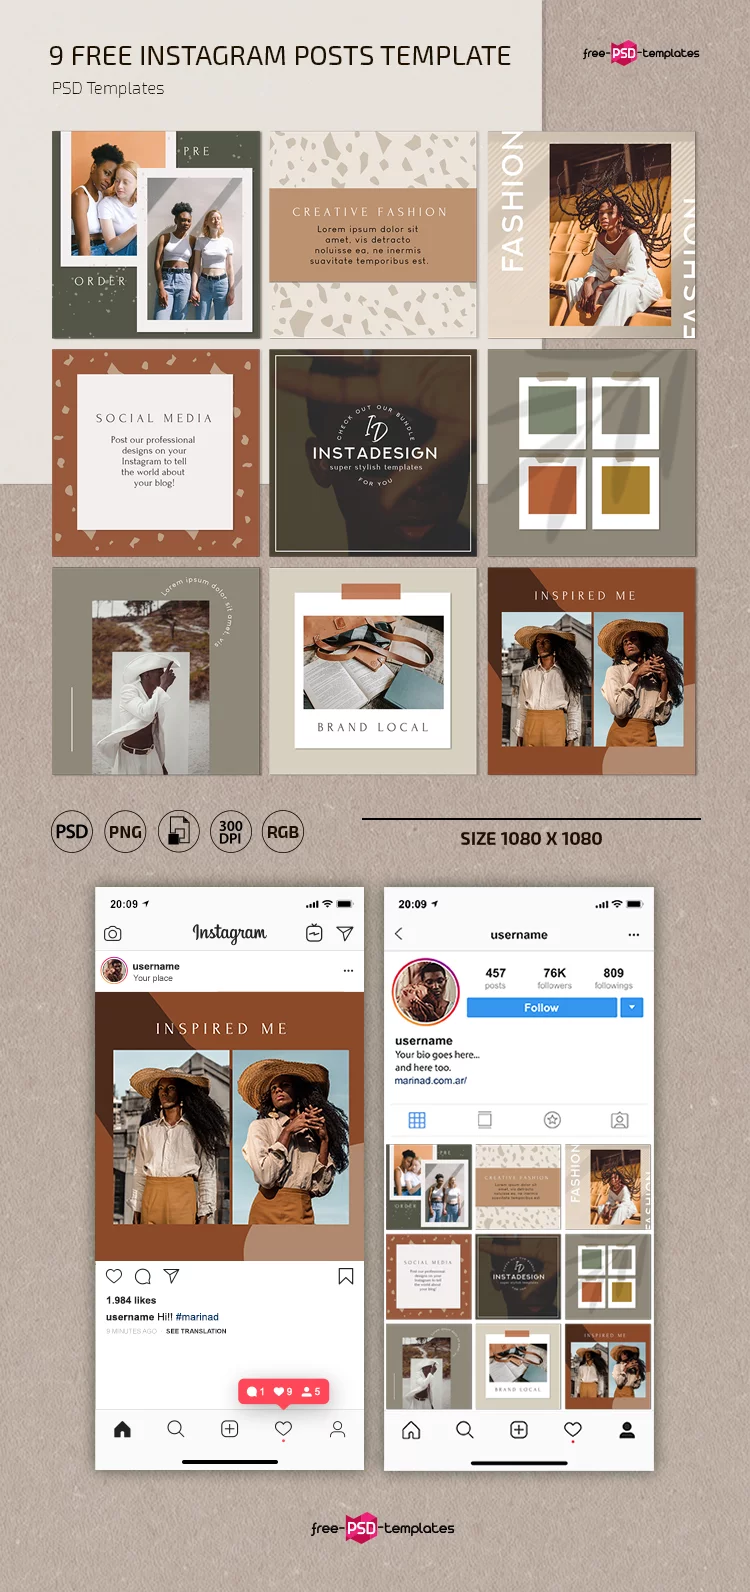 Free Instagram Blog Posts Template in PSD